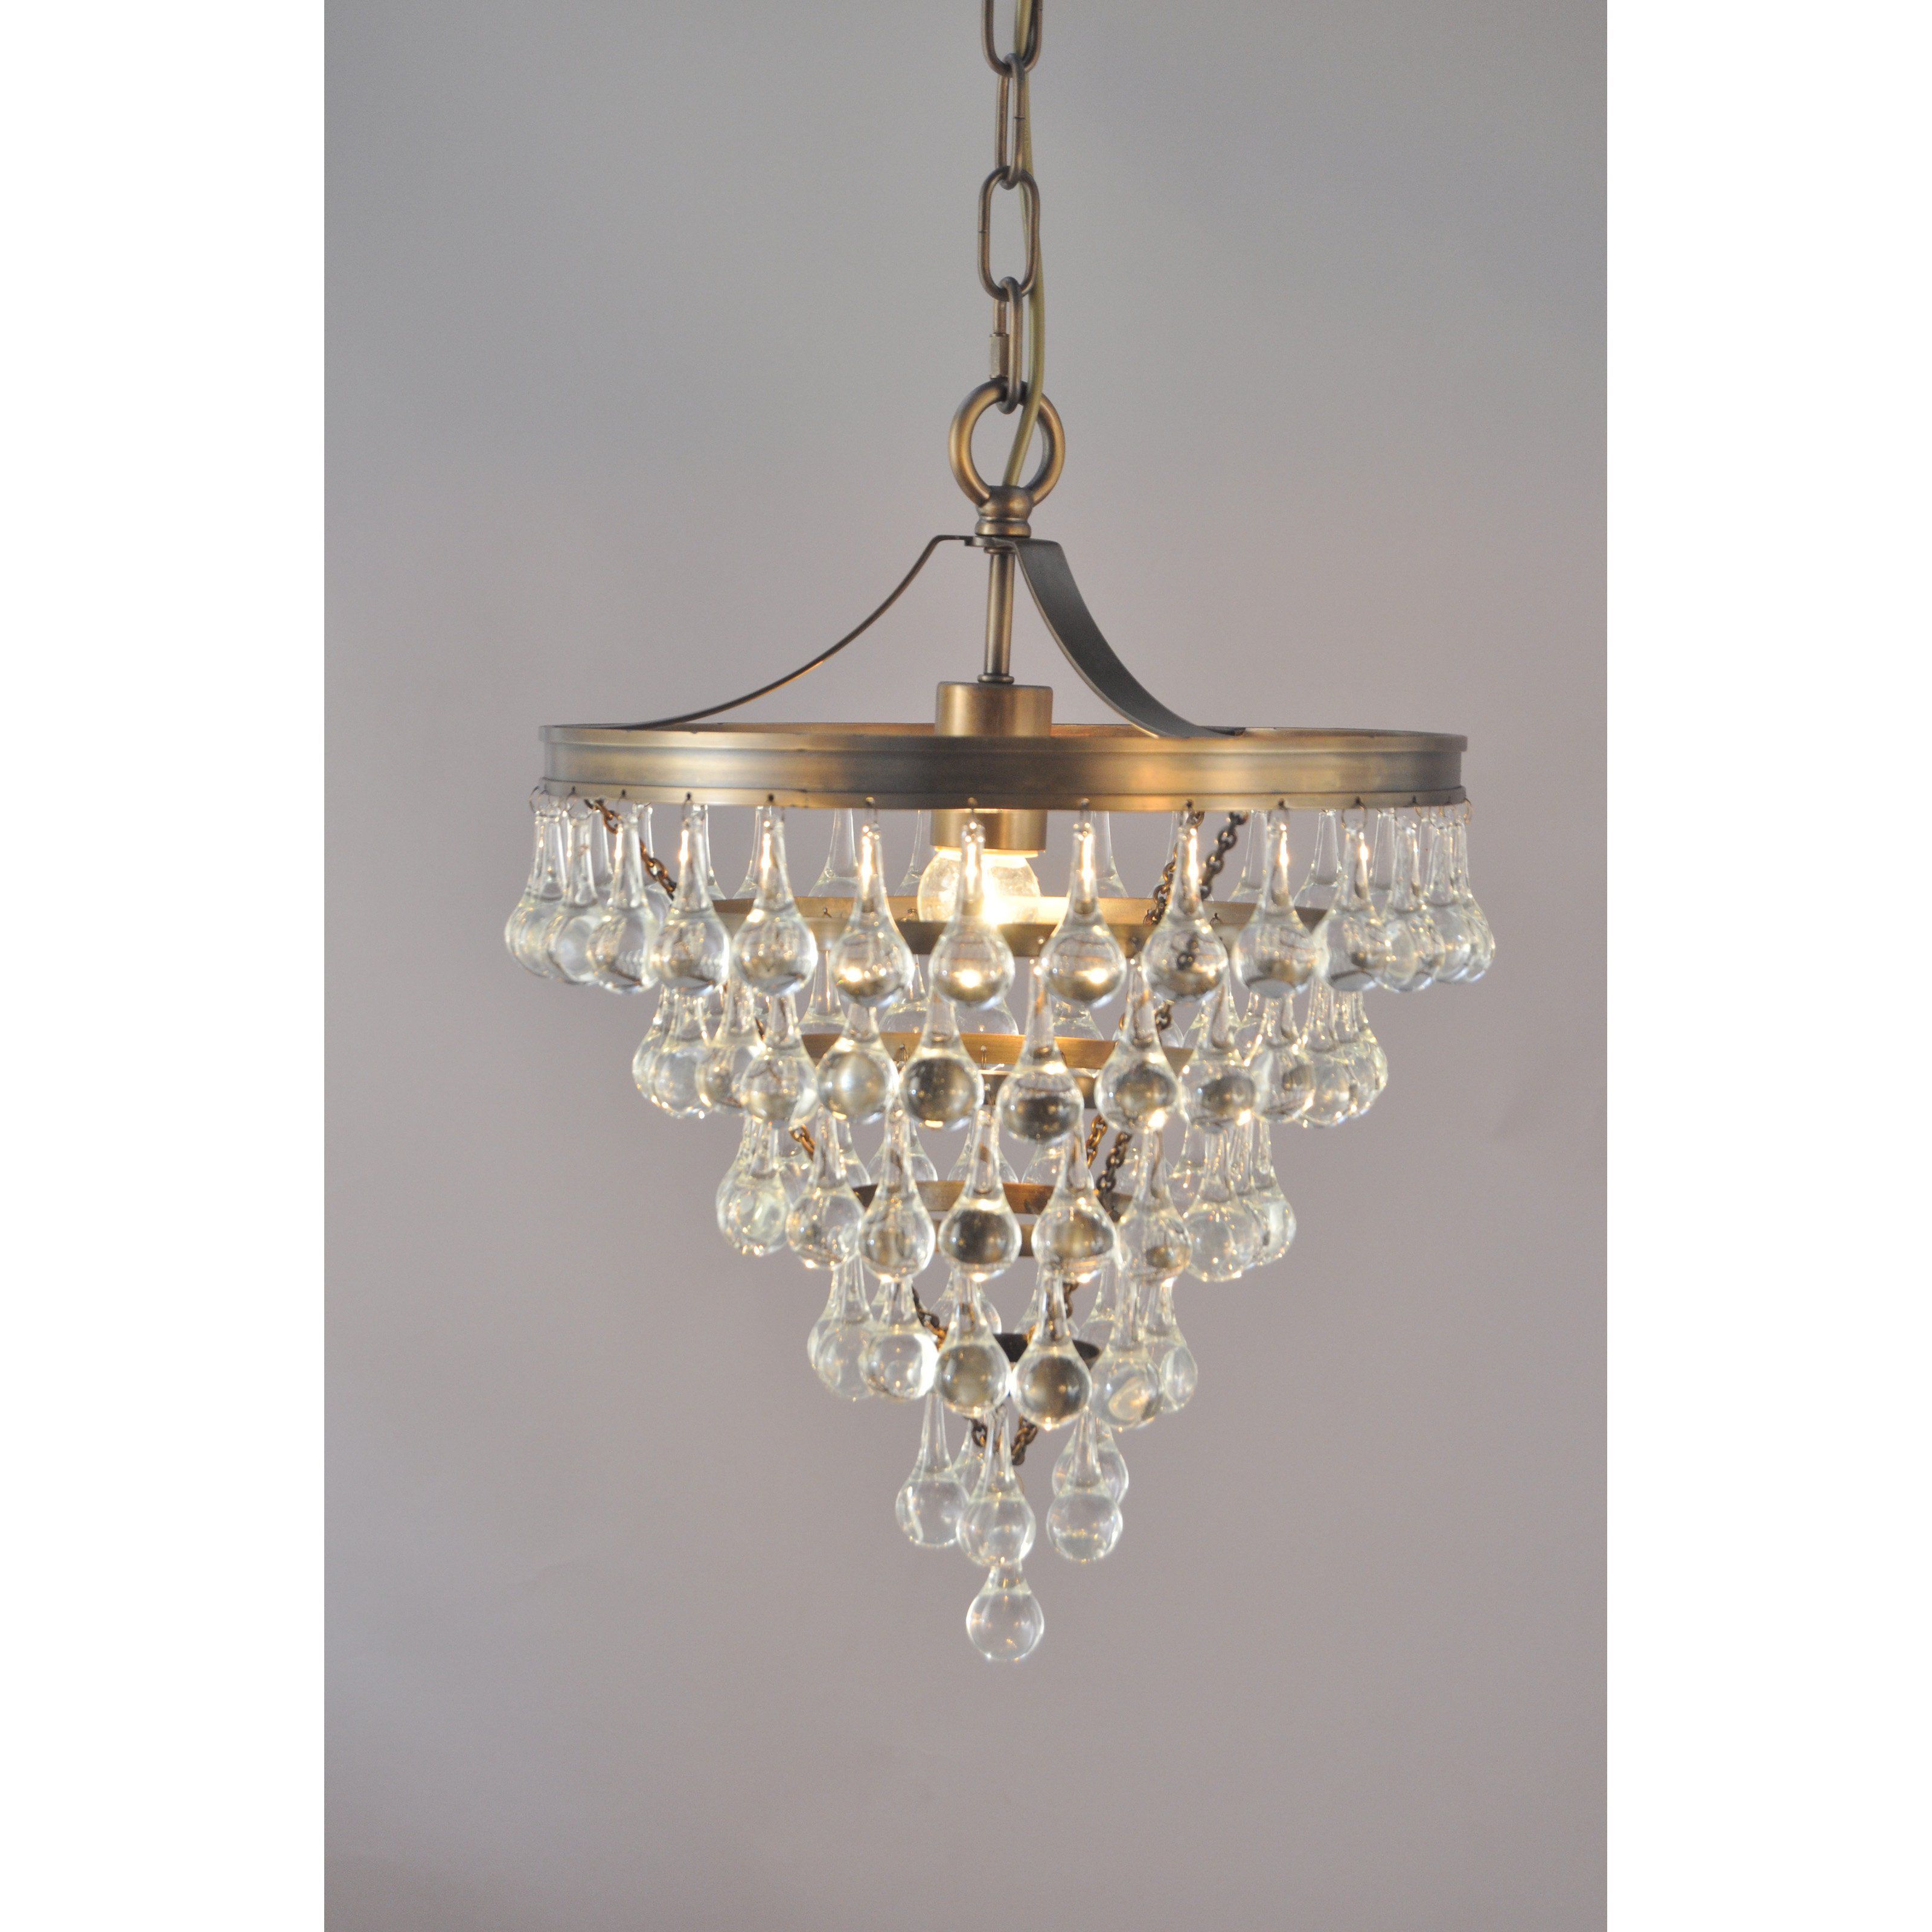 Abbyson Living Henson Claudia Sh Md2137 1anb Tear Drop 6 Intended For Blanchette 5 Light Candle Style Chandeliers (Photo 27 of 30)